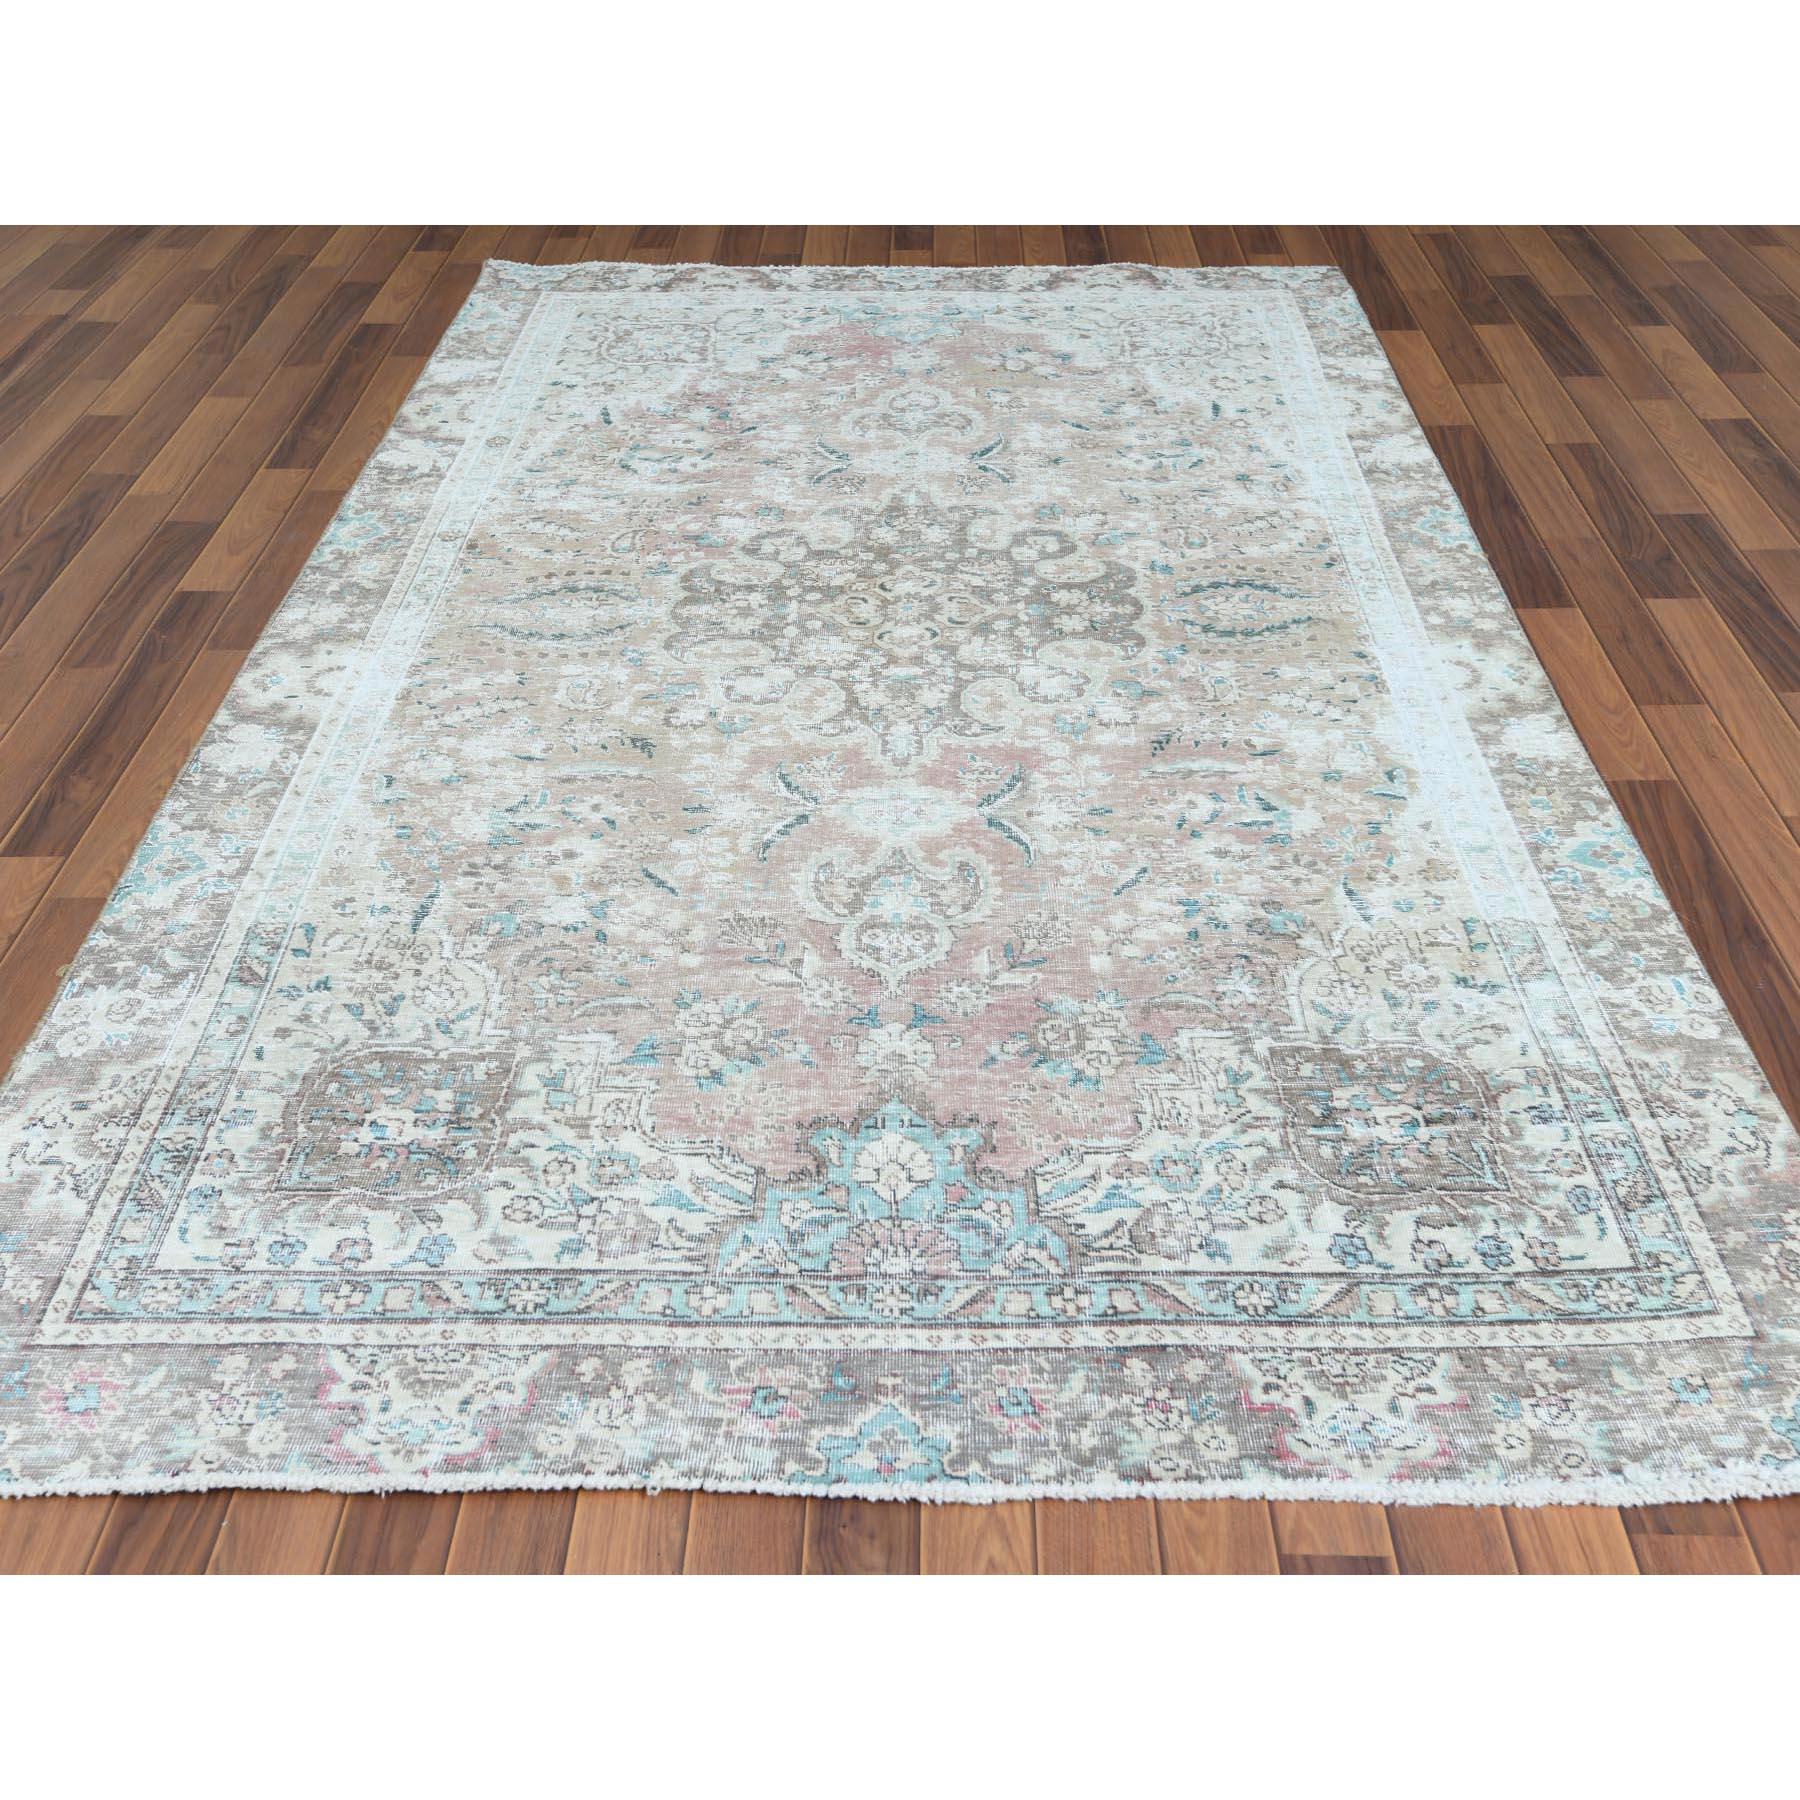 Medieval Red Bohemian Vintage Look Persian Tabriz Medallion Hand Knotted Pure Wool Rug For Sale